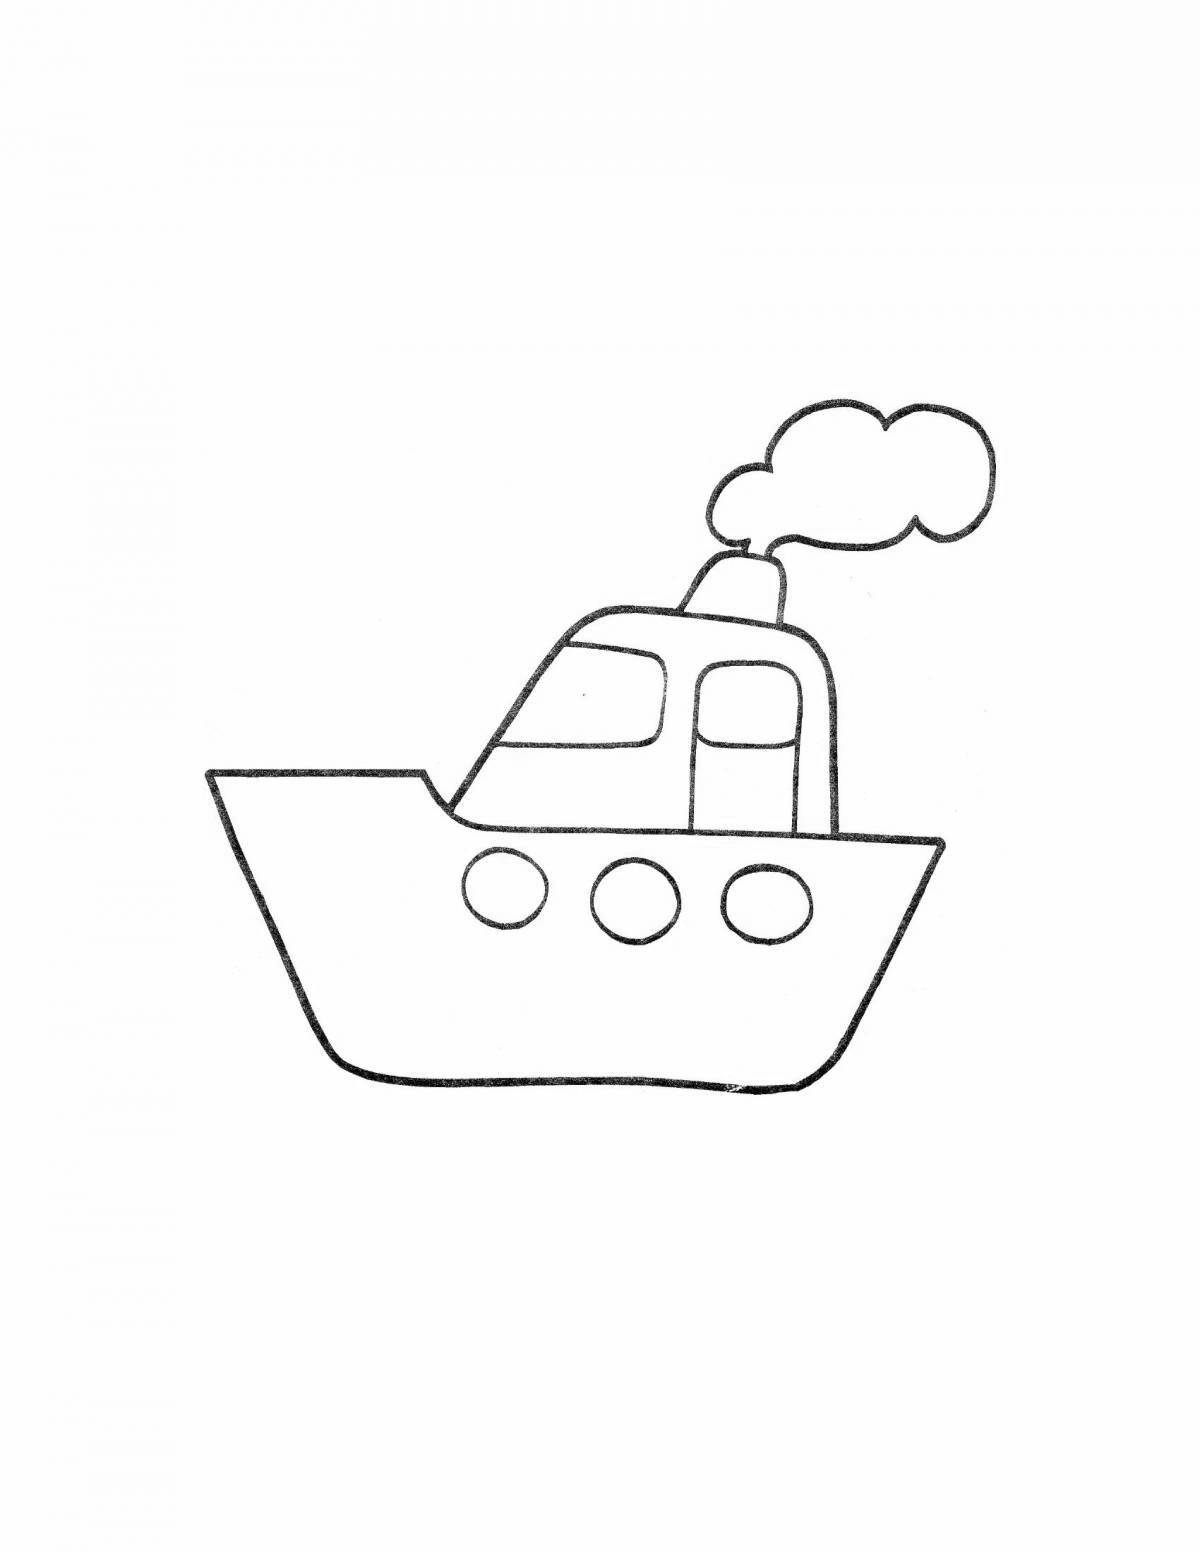 Steamship coloring page for kids